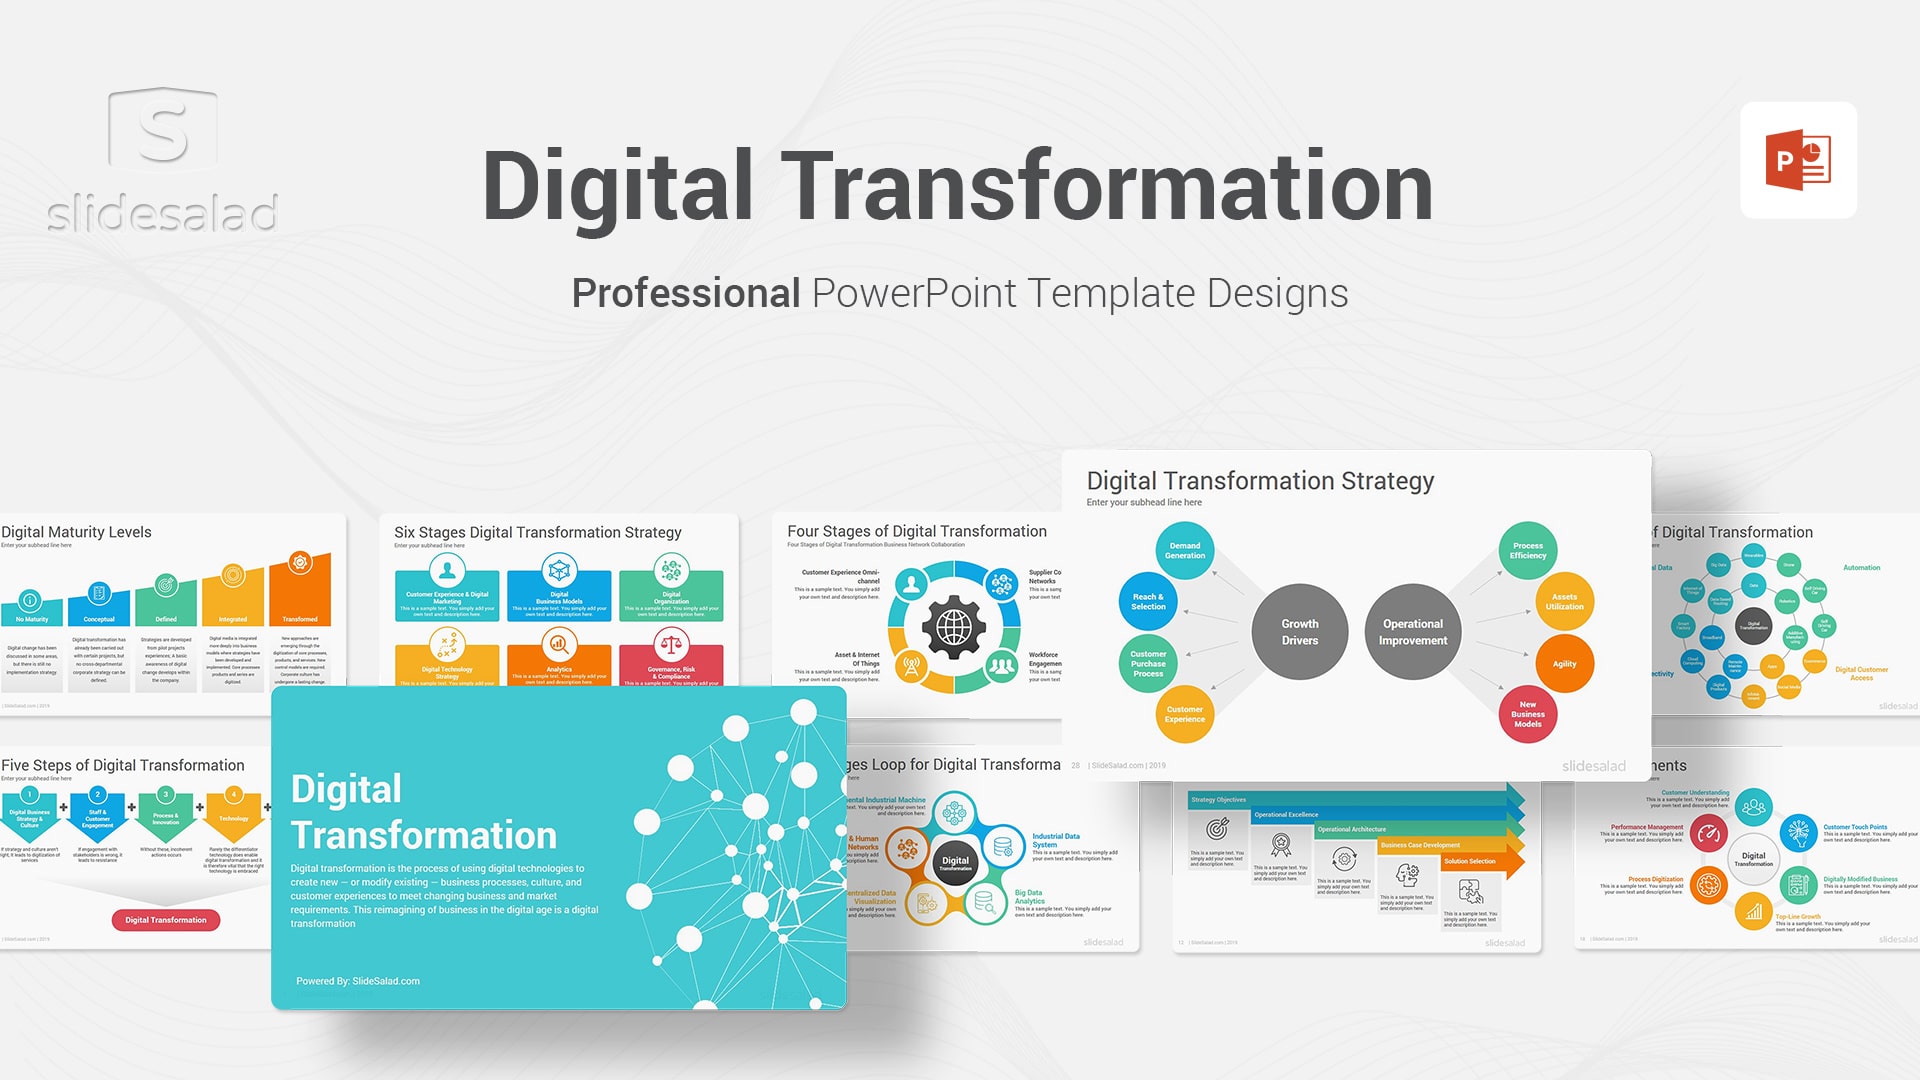 Digital Transformation PowerPoint Template - Present a Convincing Pitch Deck Presentation on How to Achieve Digital Transformation in Your Organization